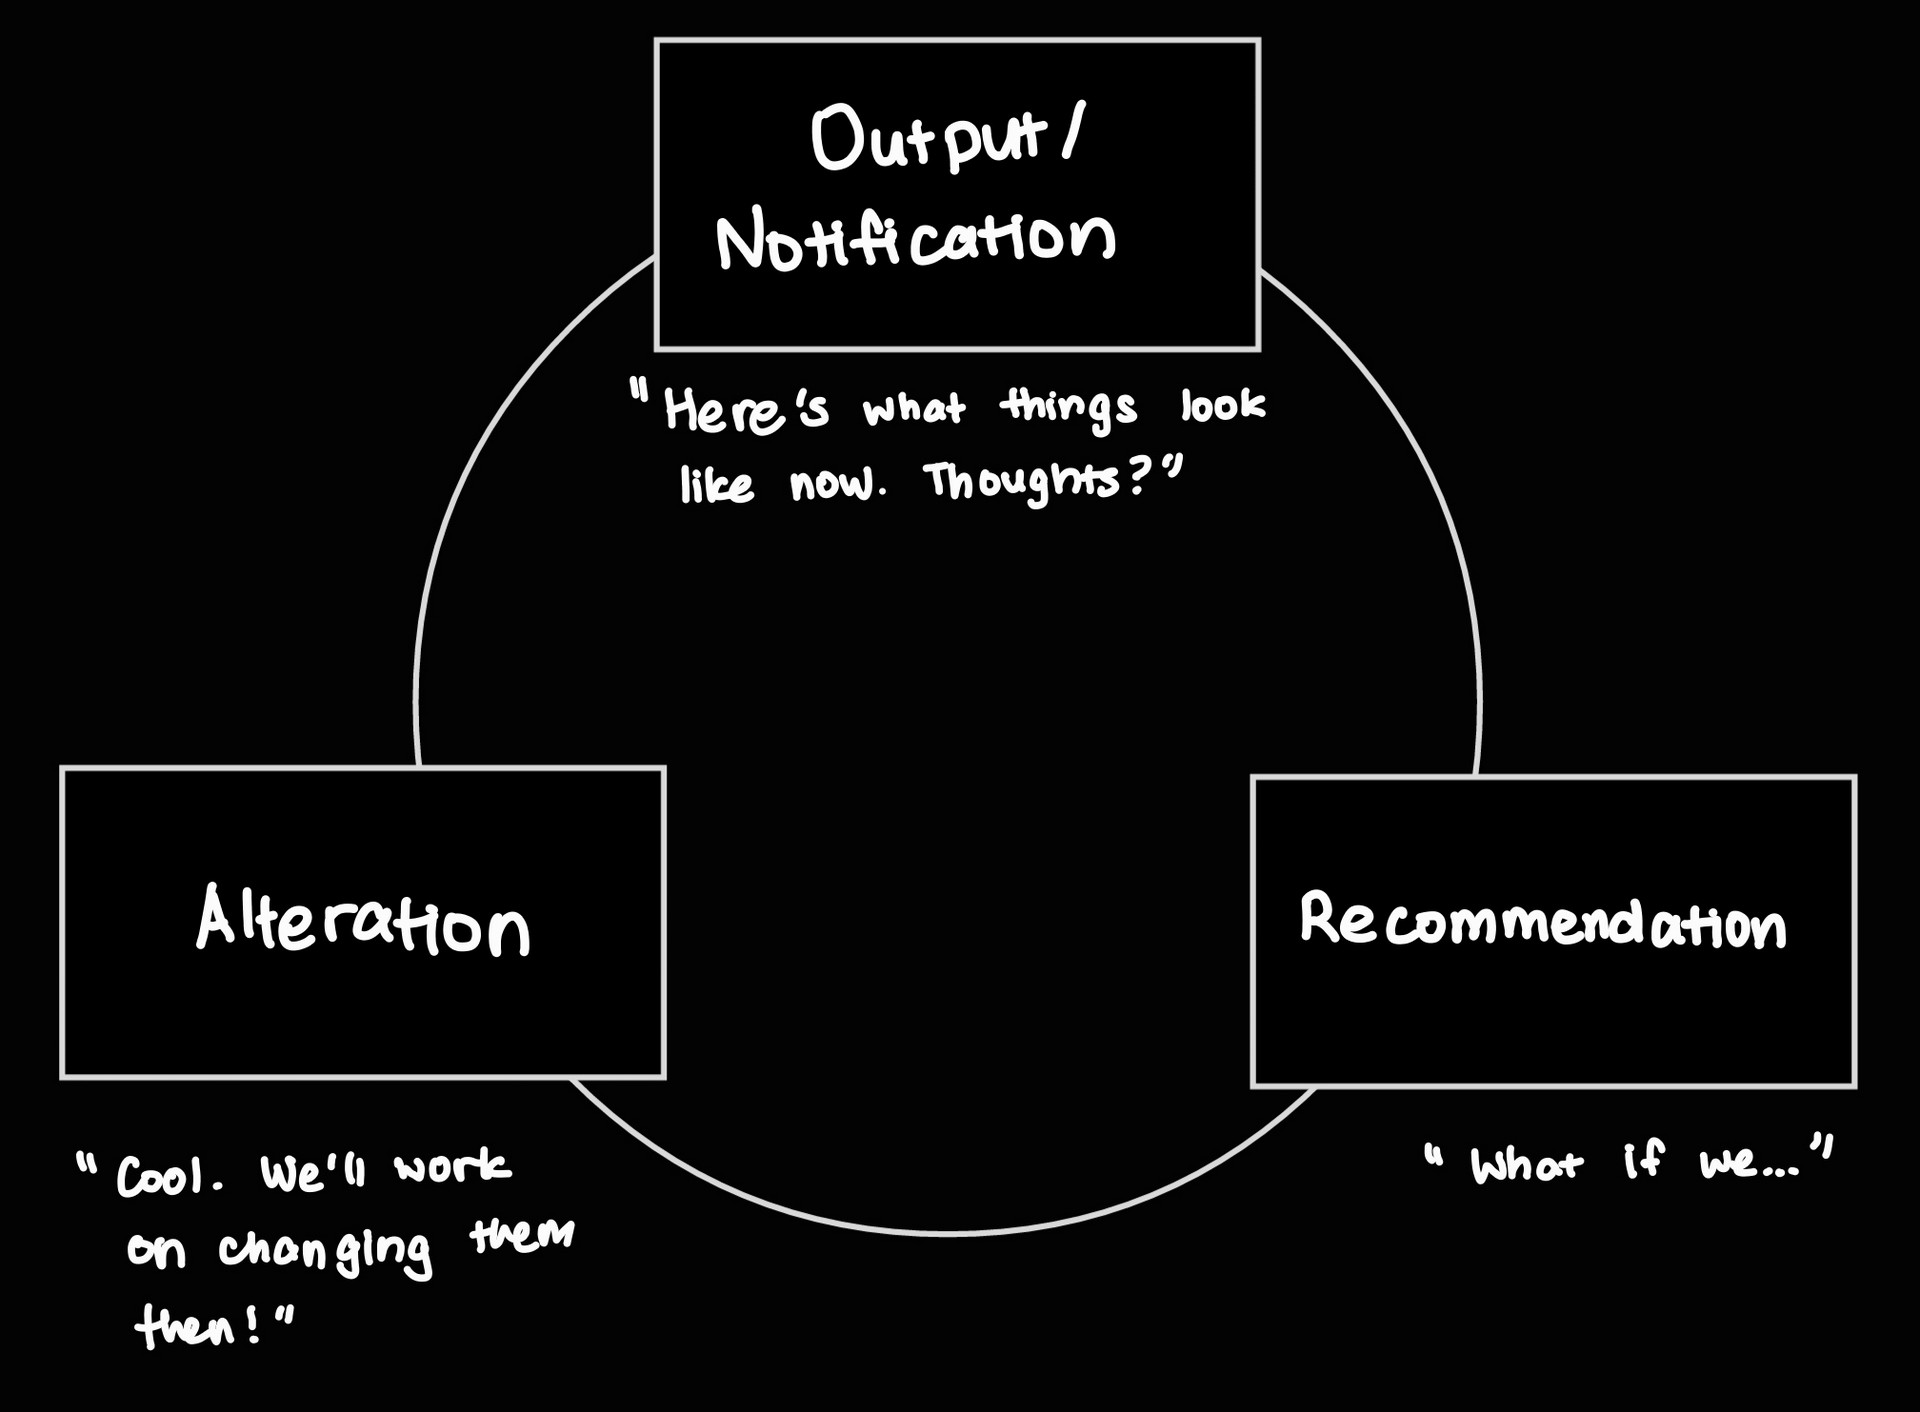 A diagram showing three things, 'Output/Notification', 'Recommendation', and 'Alteration' connected to each other.